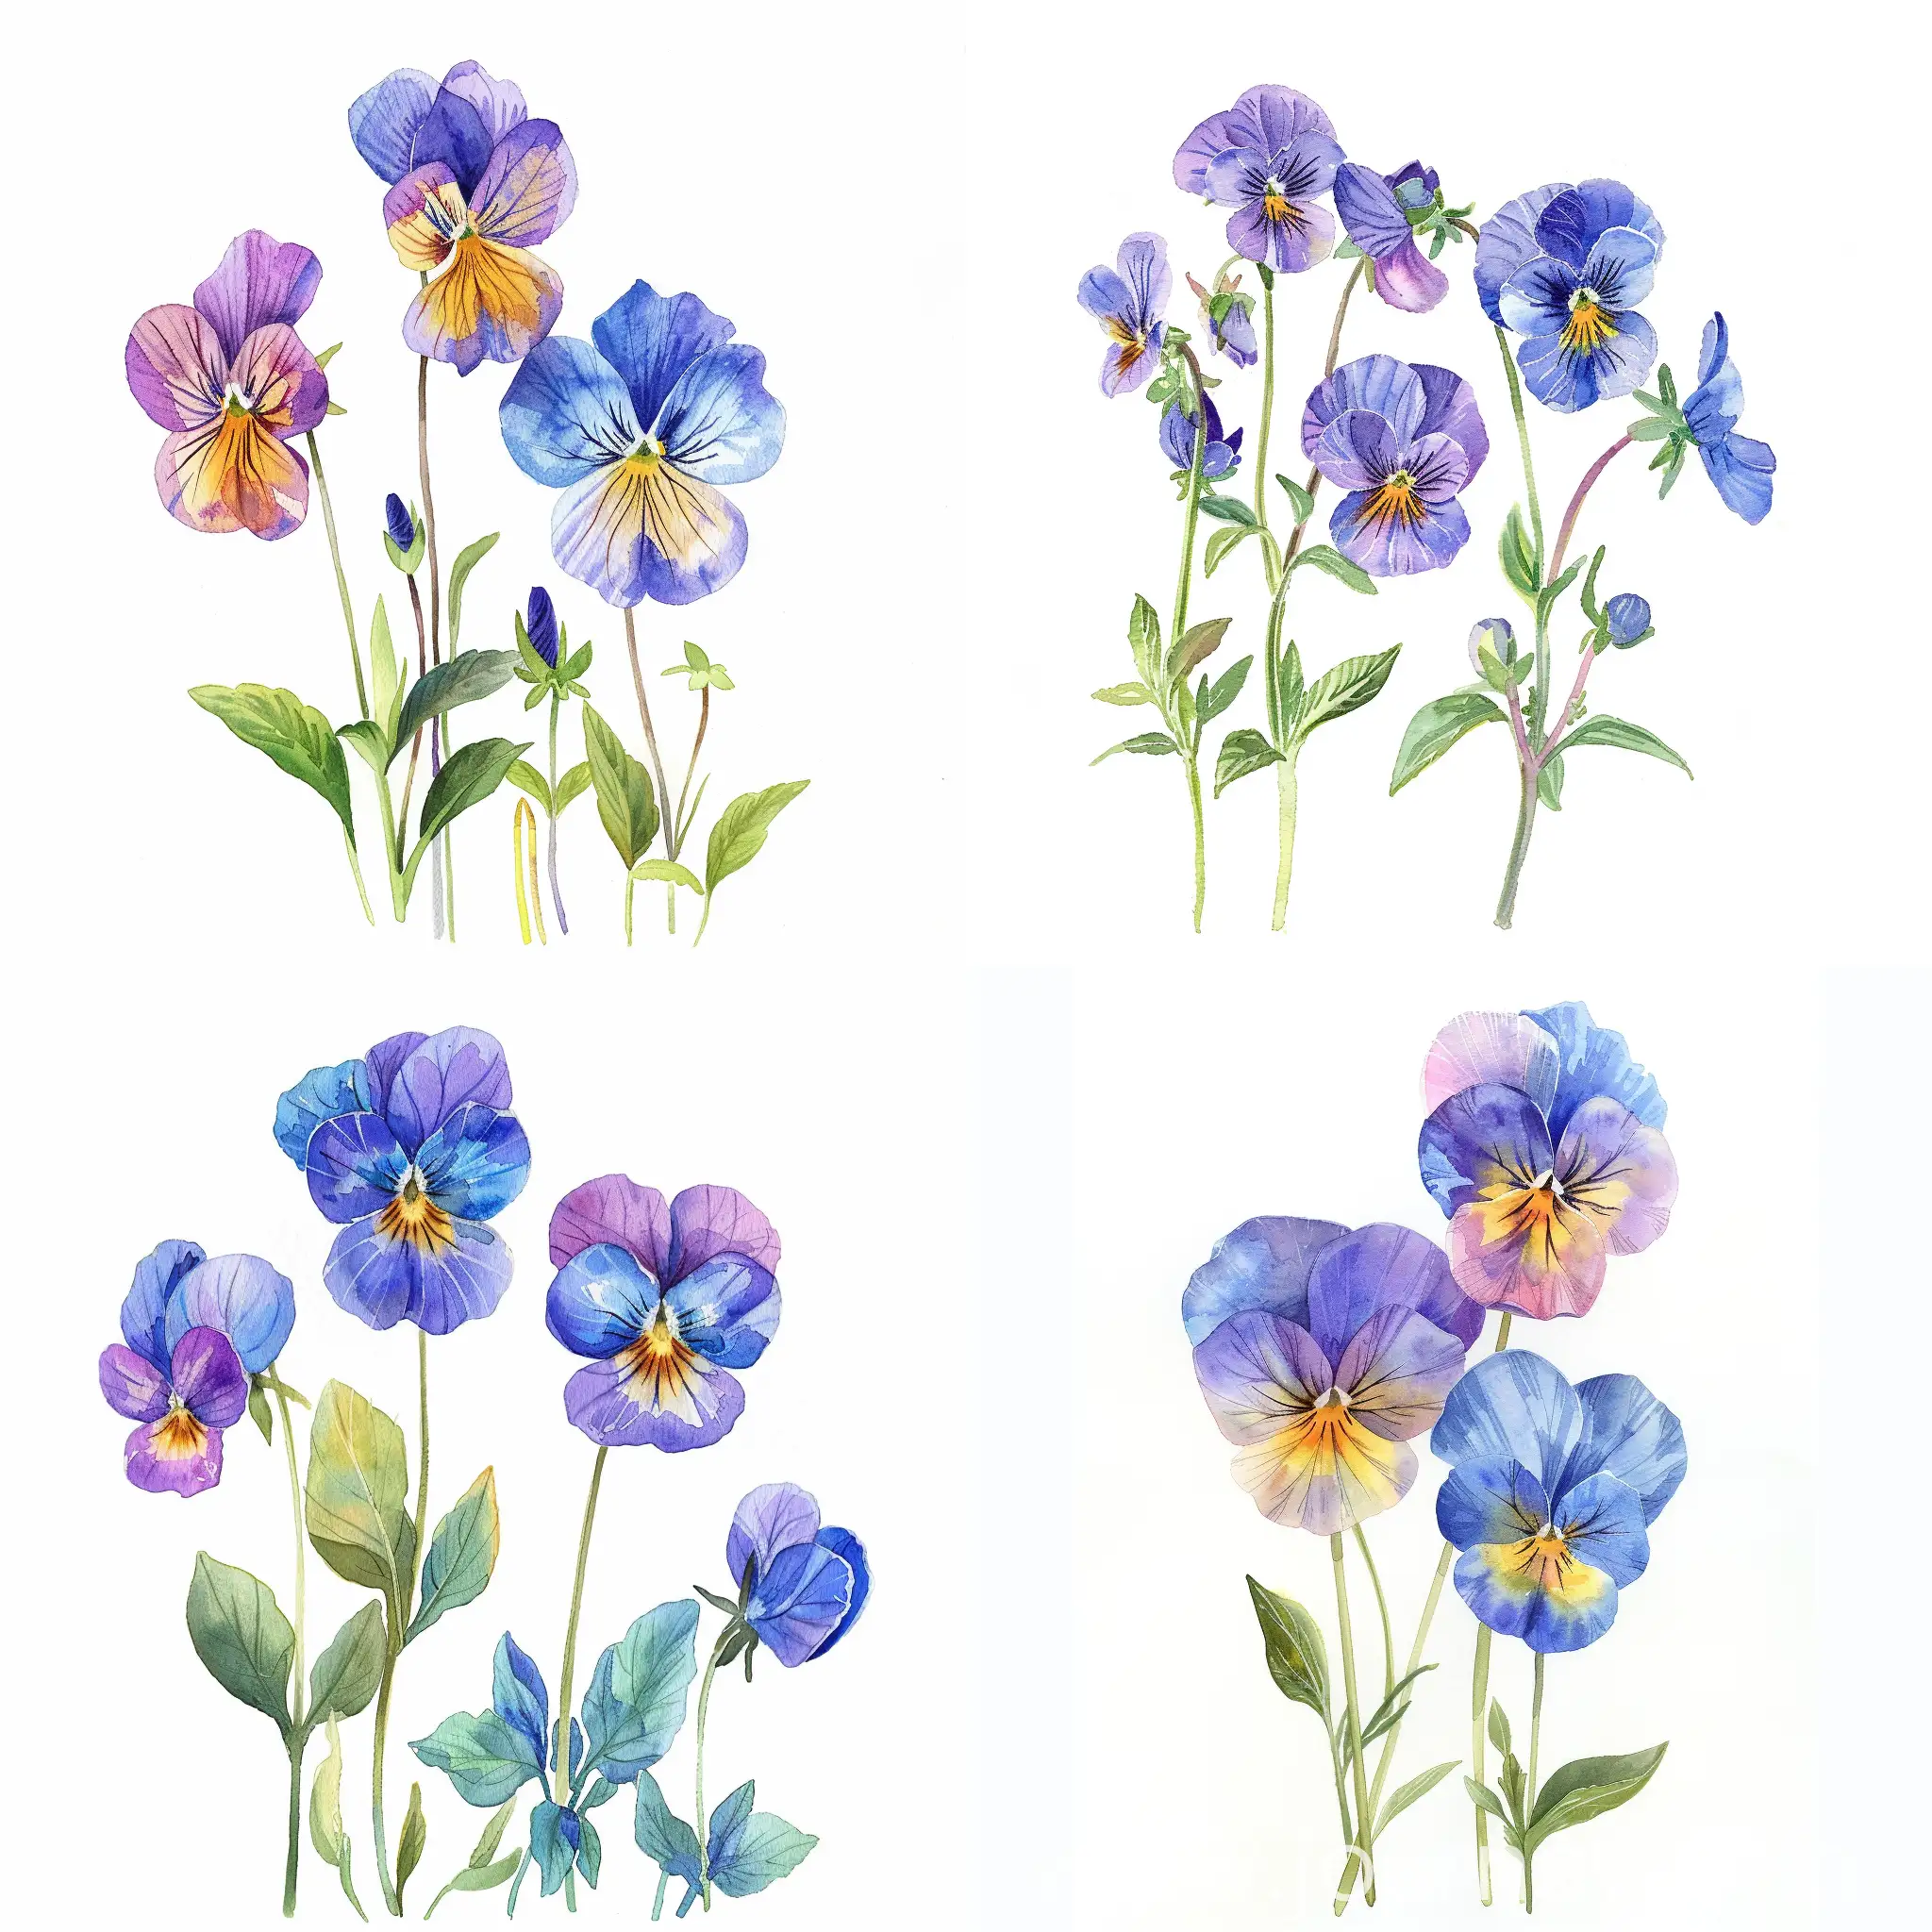 Soft-Watercolor-Viola-Tricolor-Wildflowers-on-White-Background